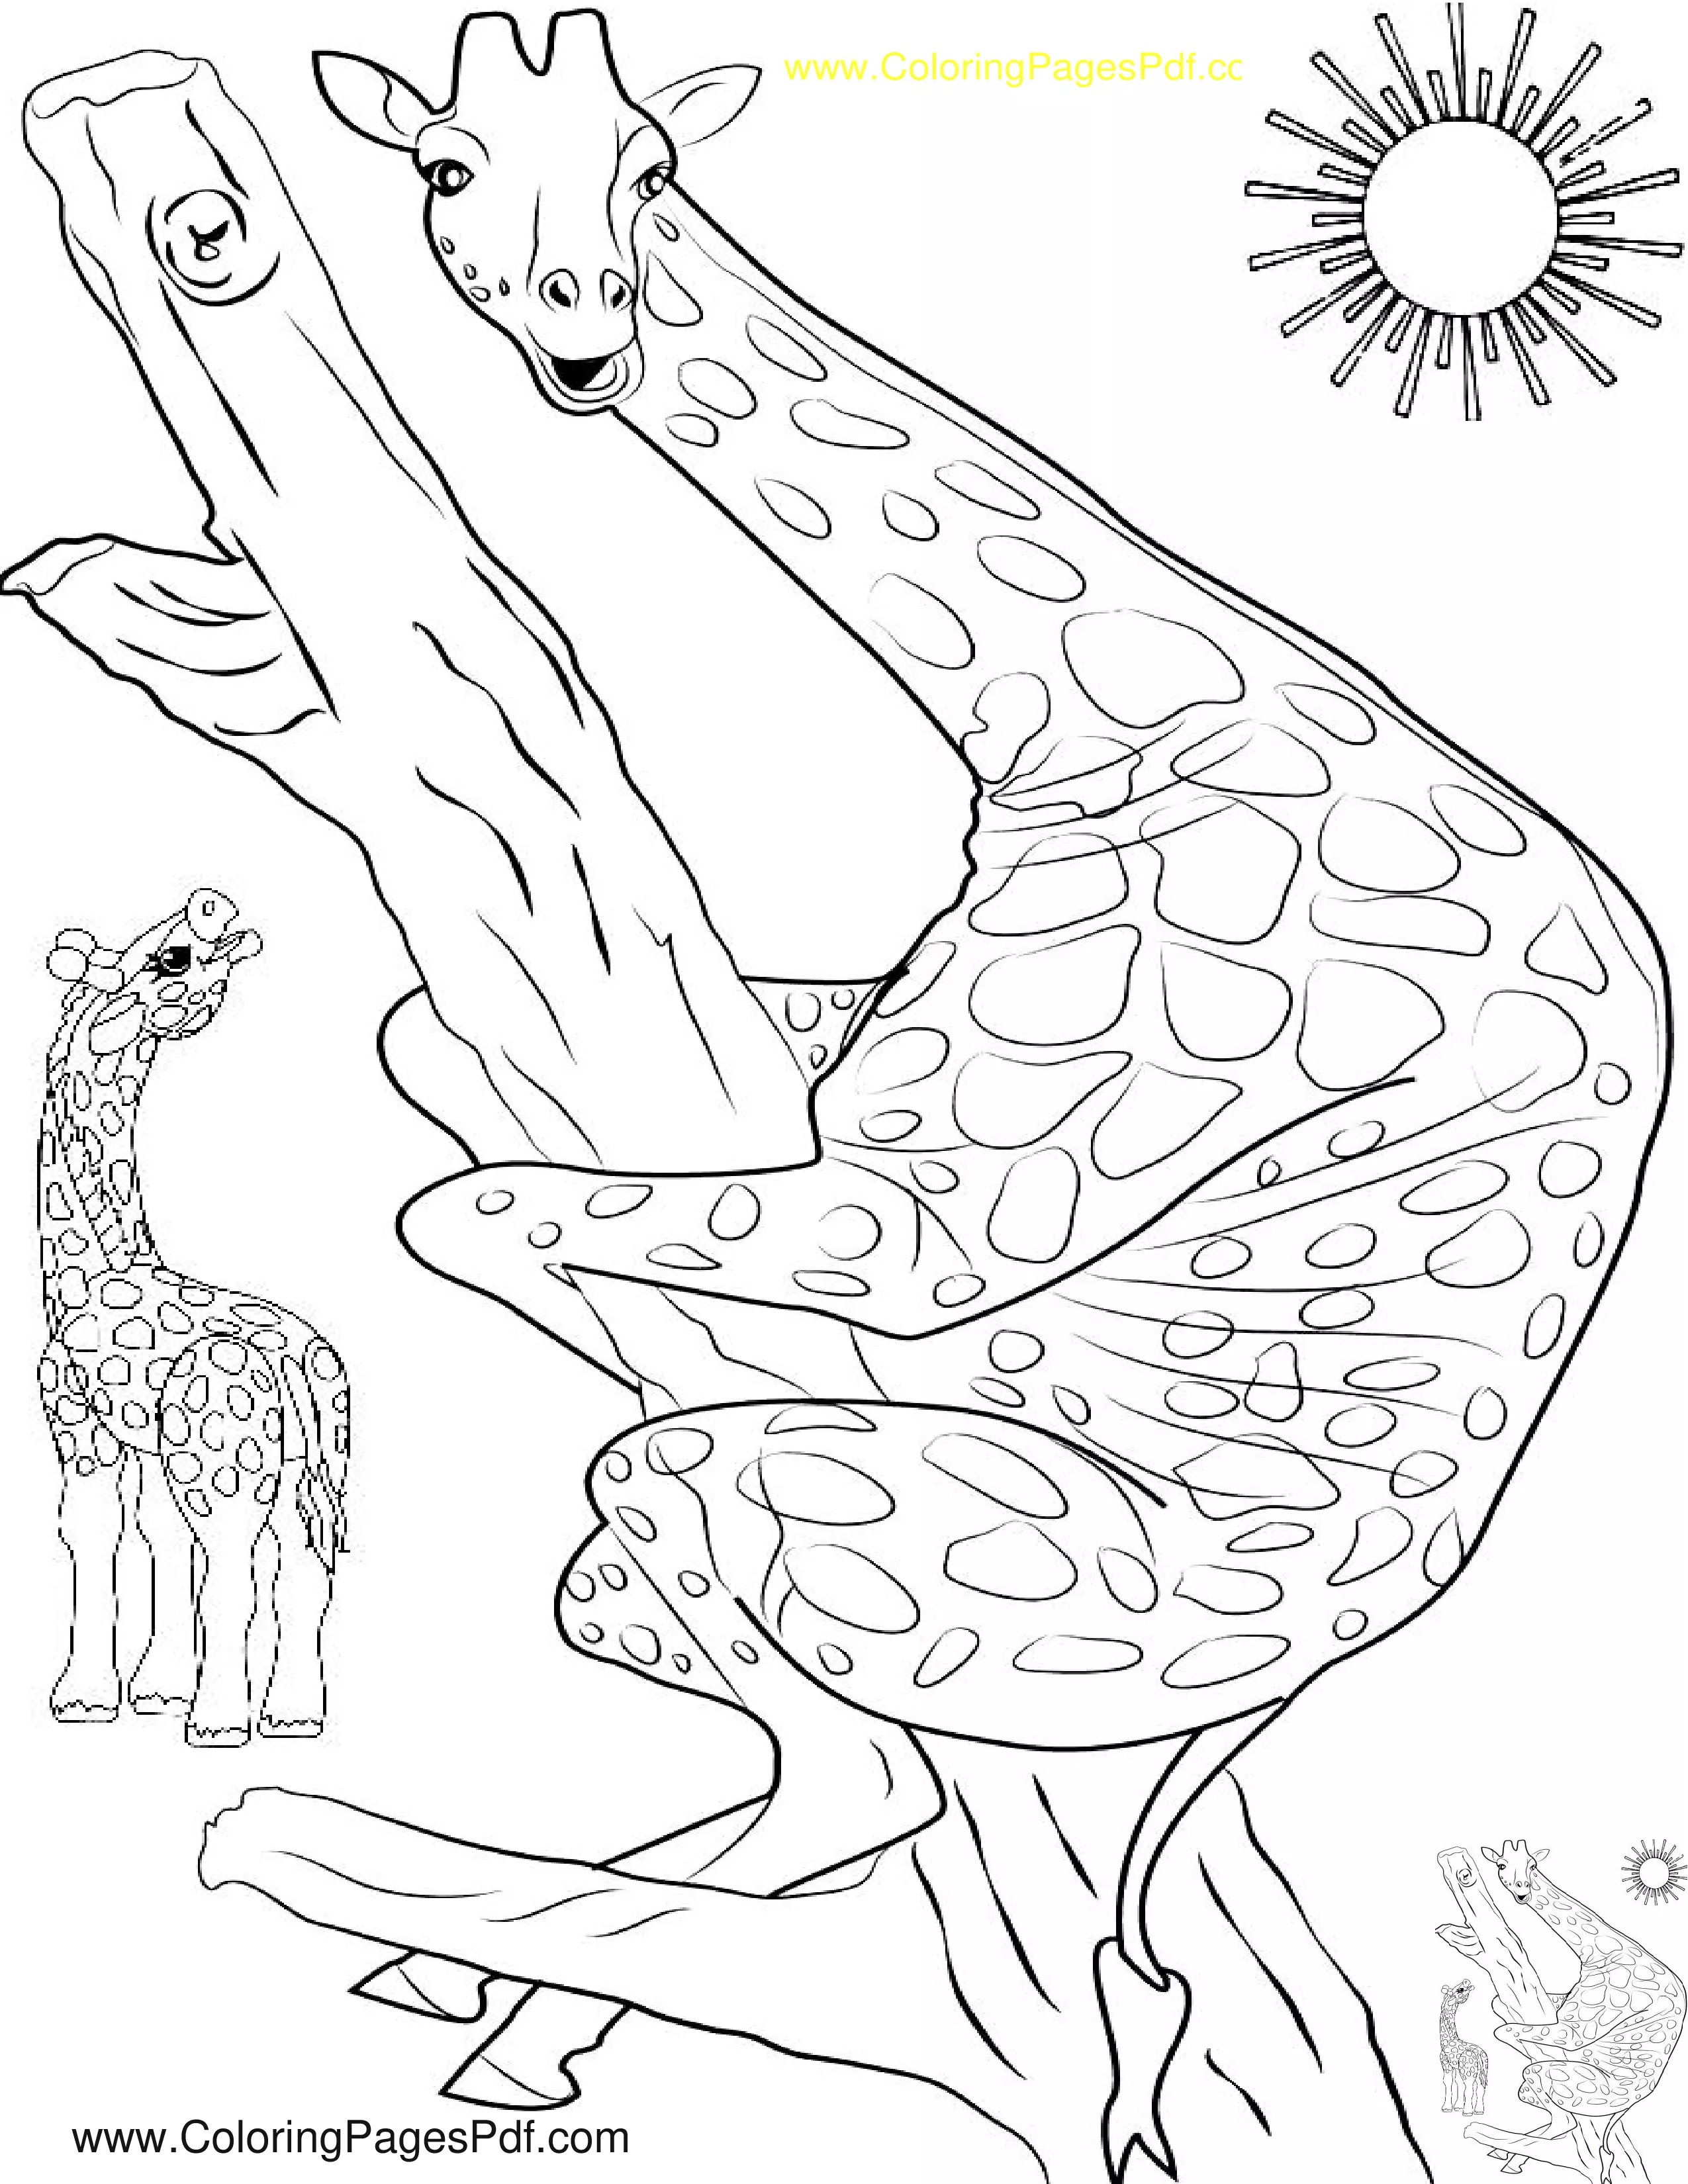 Cute giraffe coloring pages